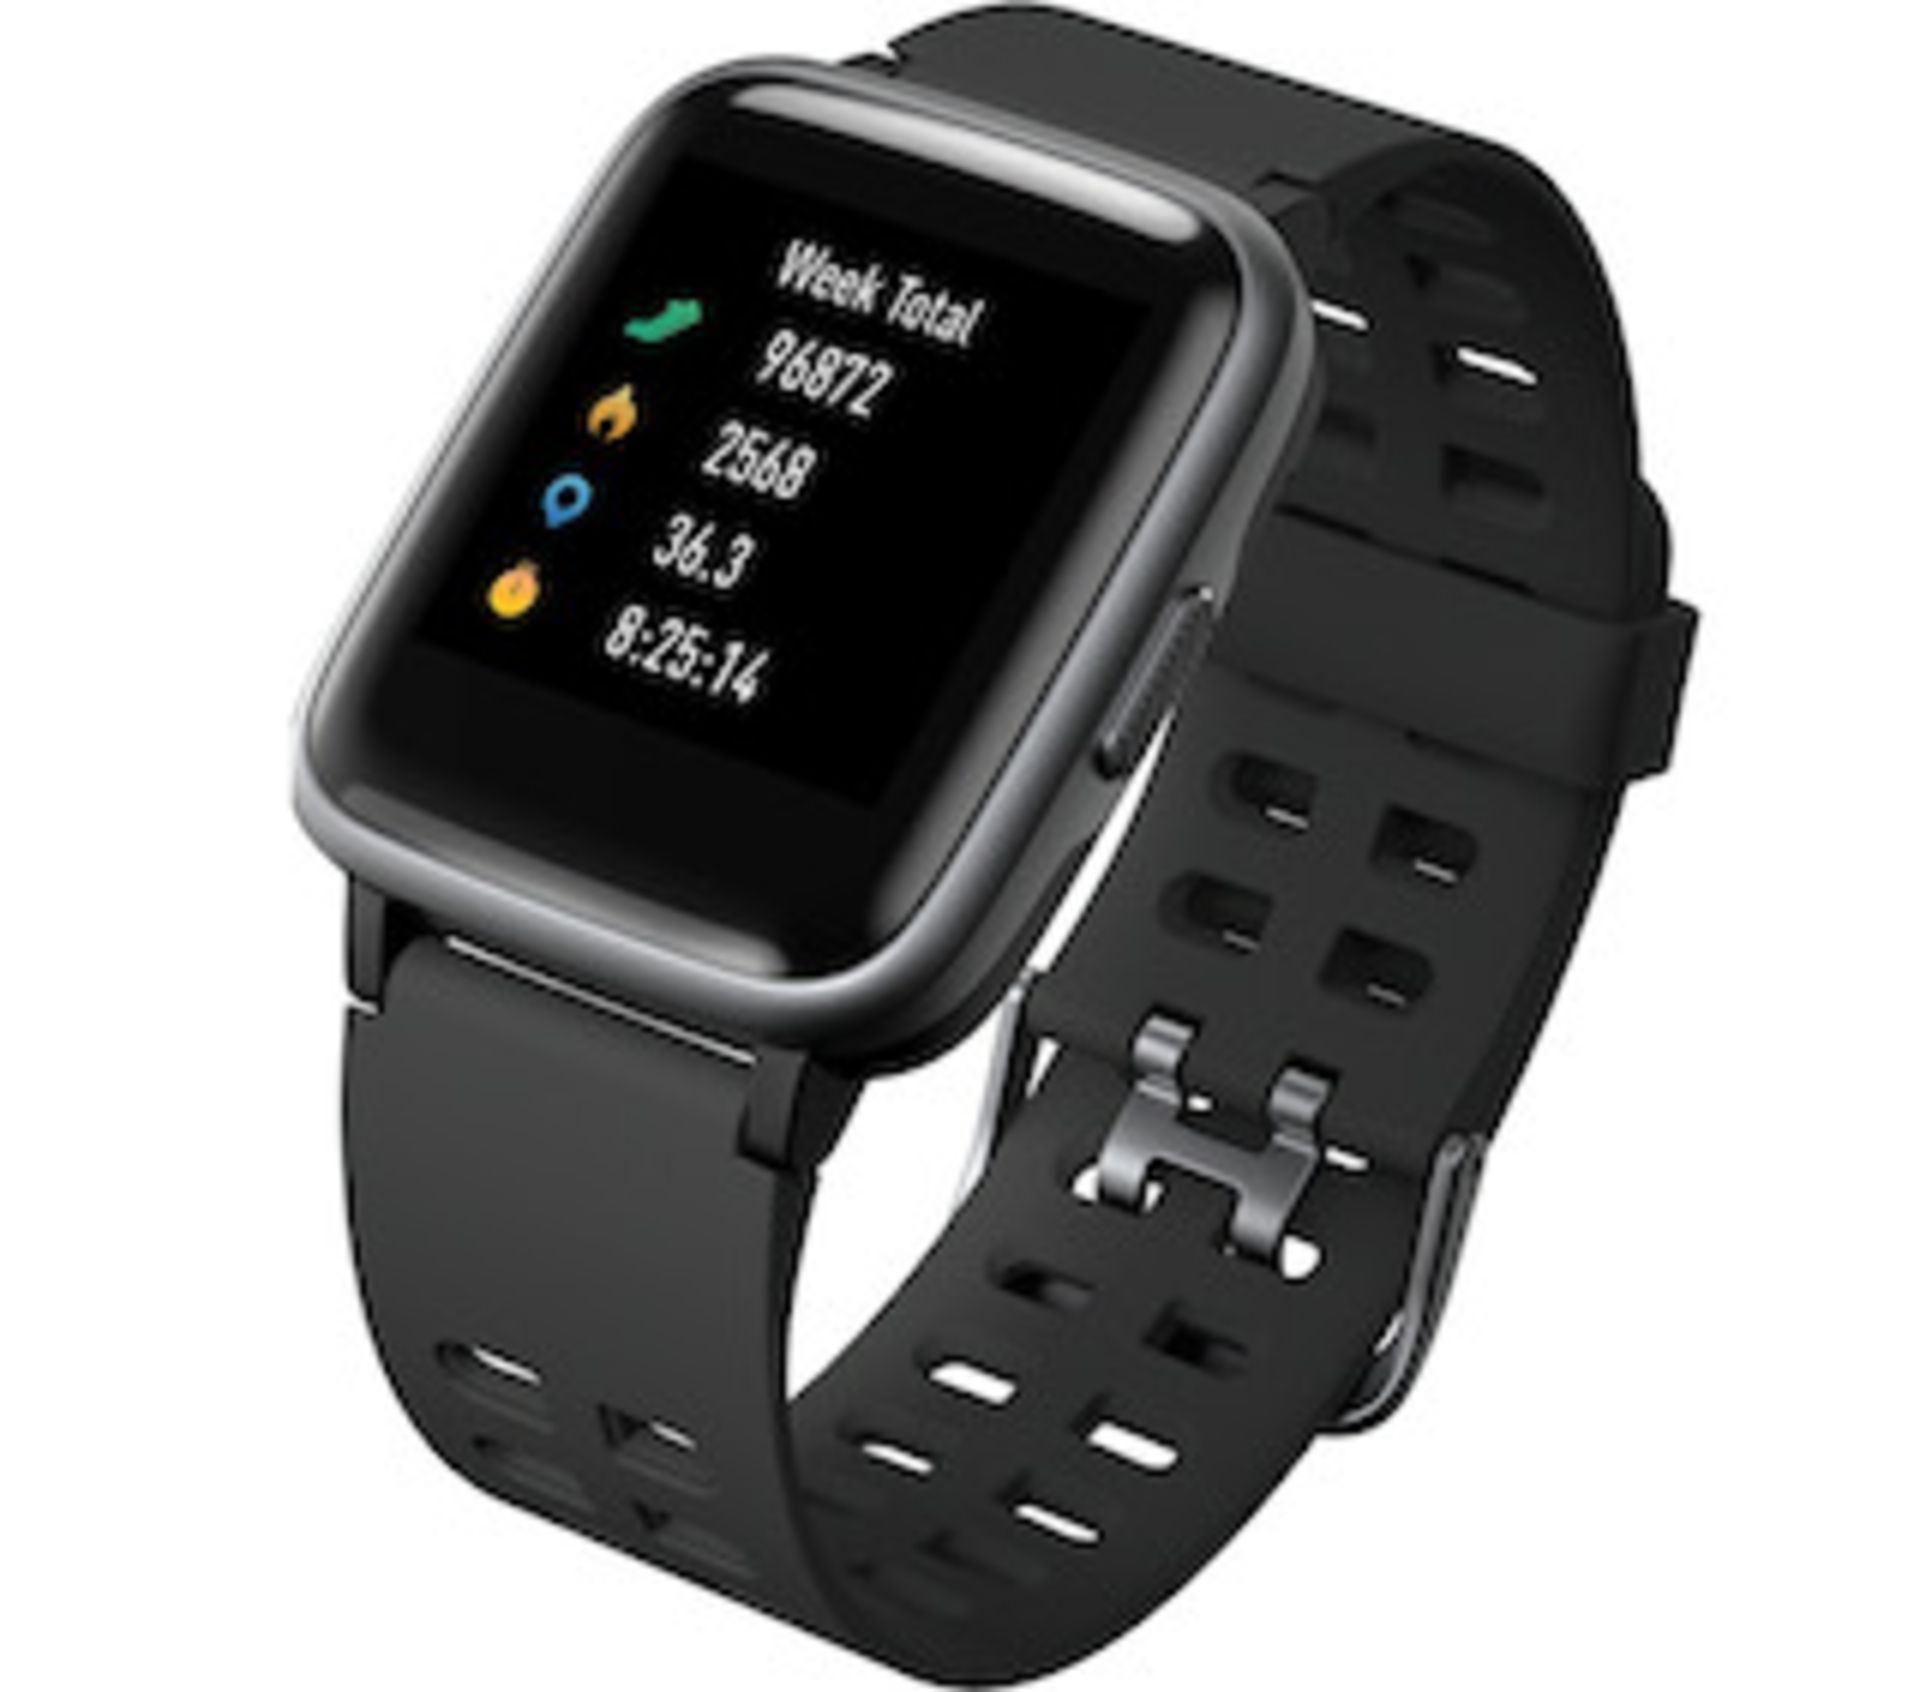 Brand New Unisex Fitness Tracker Watch Id205 Black Strap About This Item 1.3-Inch LCD Colour - Image 15 of 30